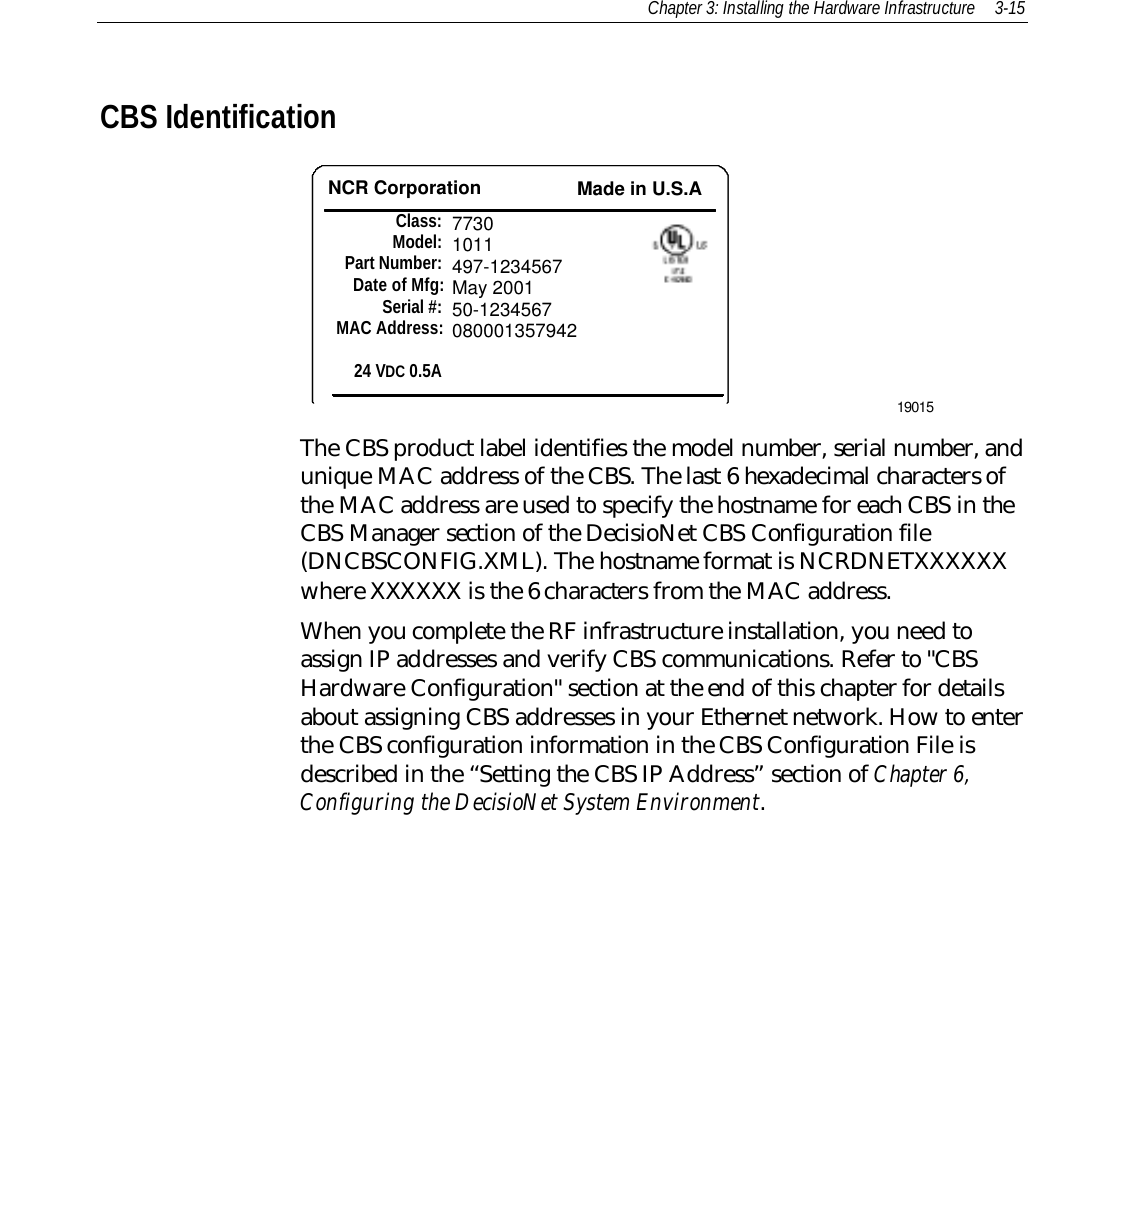 Chapter 3: Installing the Hardware Infrastructure 3-15CBS IdentificationNCR Corporation Made in U.S.AClass:Model:Part Number:Date of Mfg:Serial #:MAC Address:24 VDC 0.5A77301011497-1234567May 200150-123456708000135794219015The CBS product label identifies the model number, serial number, andunique MAC address of the CBS. The last 6 hexadecimal characters ofthe MAC address are used to specify the hostname for each CBS in theCBS Manager section of the DecisioNet CBS Configuration file(DNCBSCONFIG.XML). The hostname format is NCRDNETXXXXXXwhere XXXXXX is the 6 characters from the MAC address.When you complete the RF infrastructure installation, you need toassign IP addresses and verify CBS communications. Refer to &quot;CBSHardware Configuration&quot; section at the end of this chapter for detailsabout assigning CBS addresses in your Ethernet network. How to enterthe CBS configuration information in the CBS Configuration File isdescribed in the “Setting the CBS IP Address” section of Chapter 6,Configuring the DecisioNet System Environment.